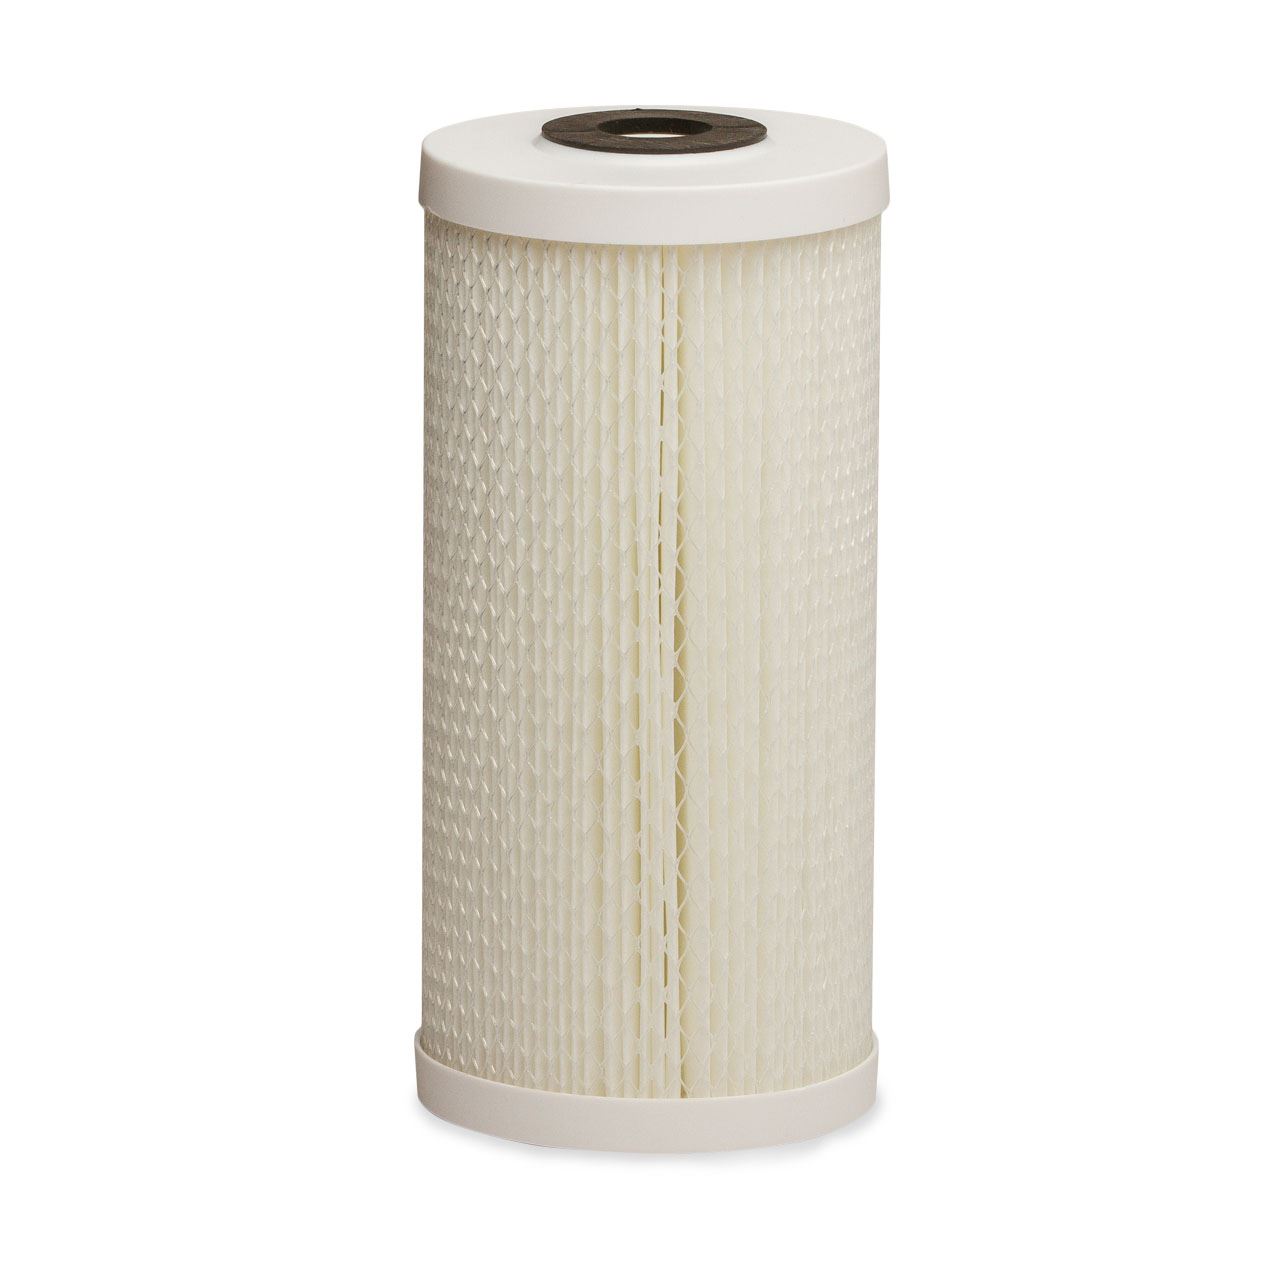 6 Polyester Pleated Water Filter cartridges 2.5 x 9.875